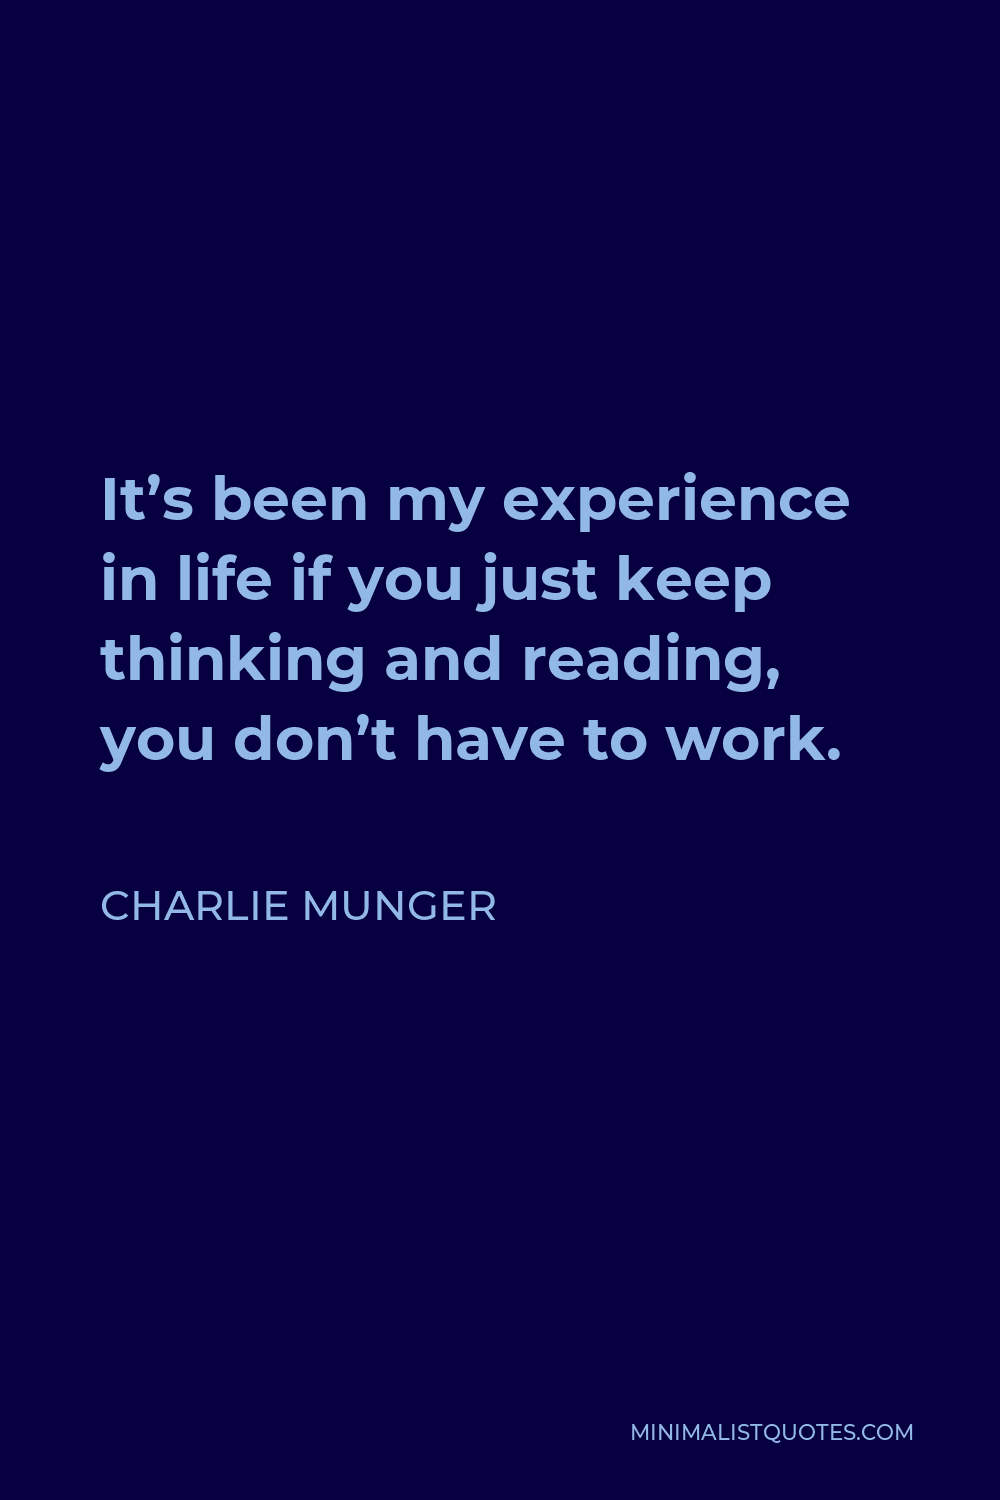 Charlie Munger Quote - It’s been my experience in life if you just keep thinking and reading, you don’t have to work.